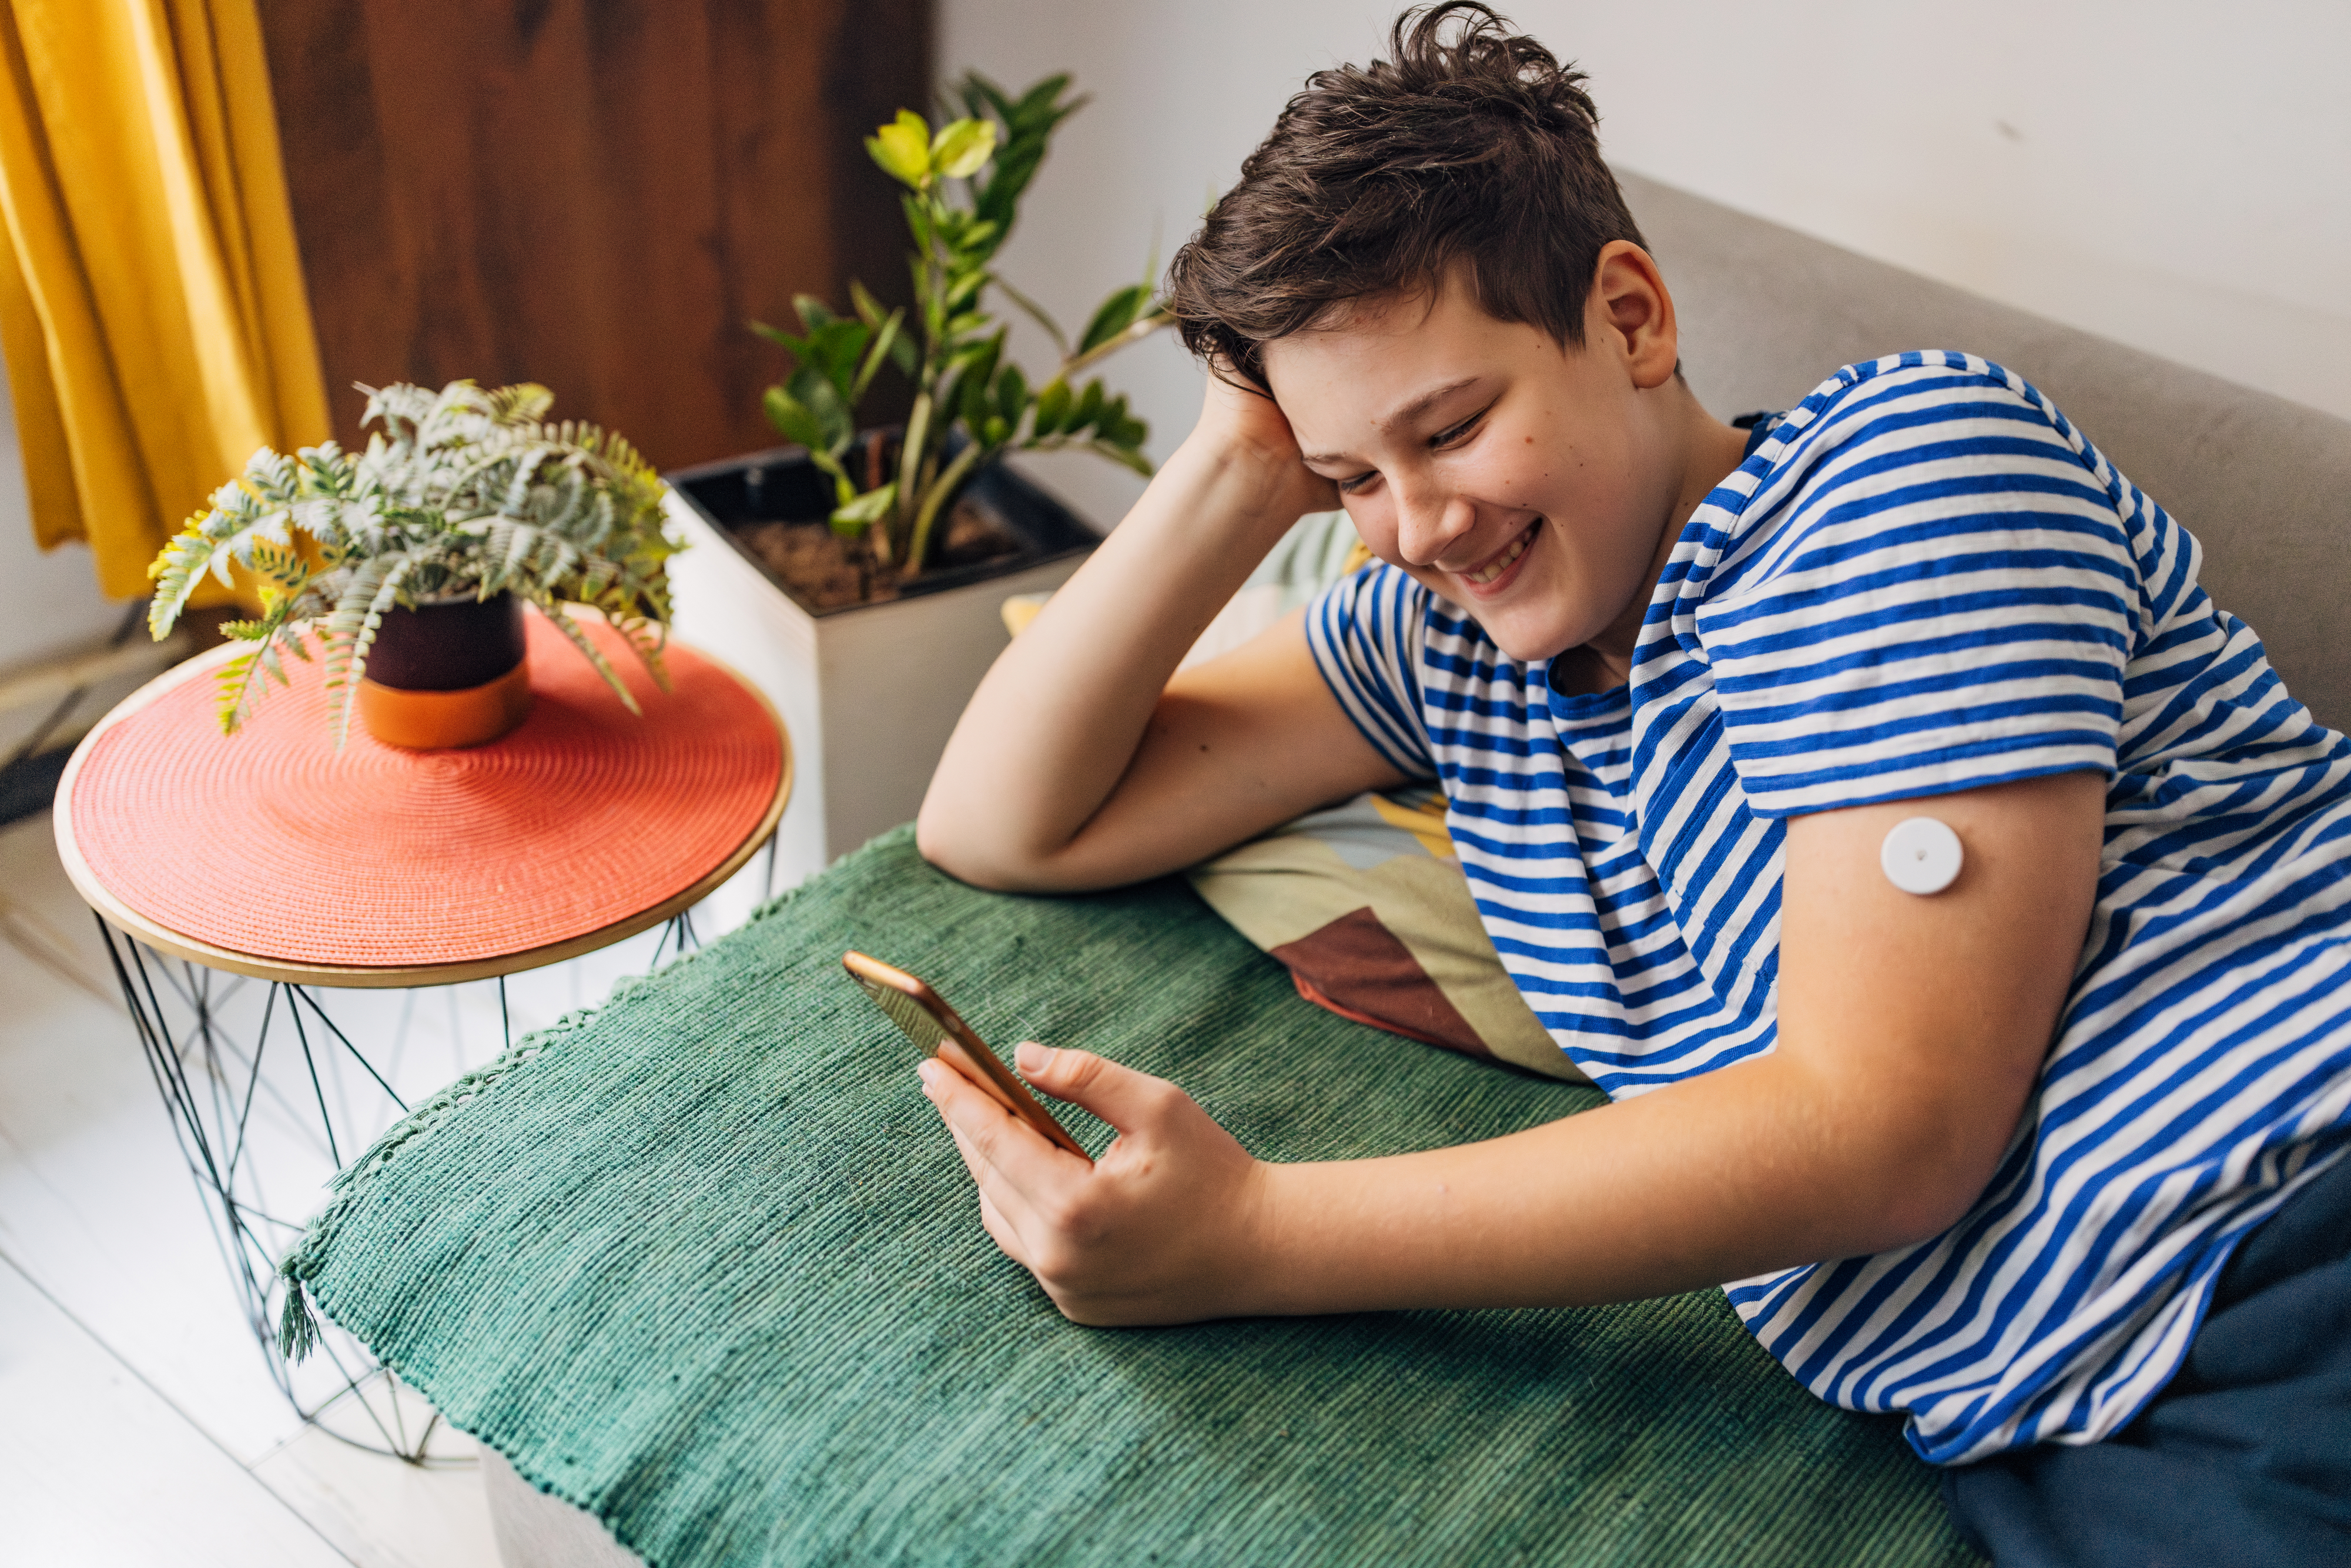 A person with a continuous glucose monitor on their arm is smiling while looking at their phone, relaxing on a couch with plants in the background